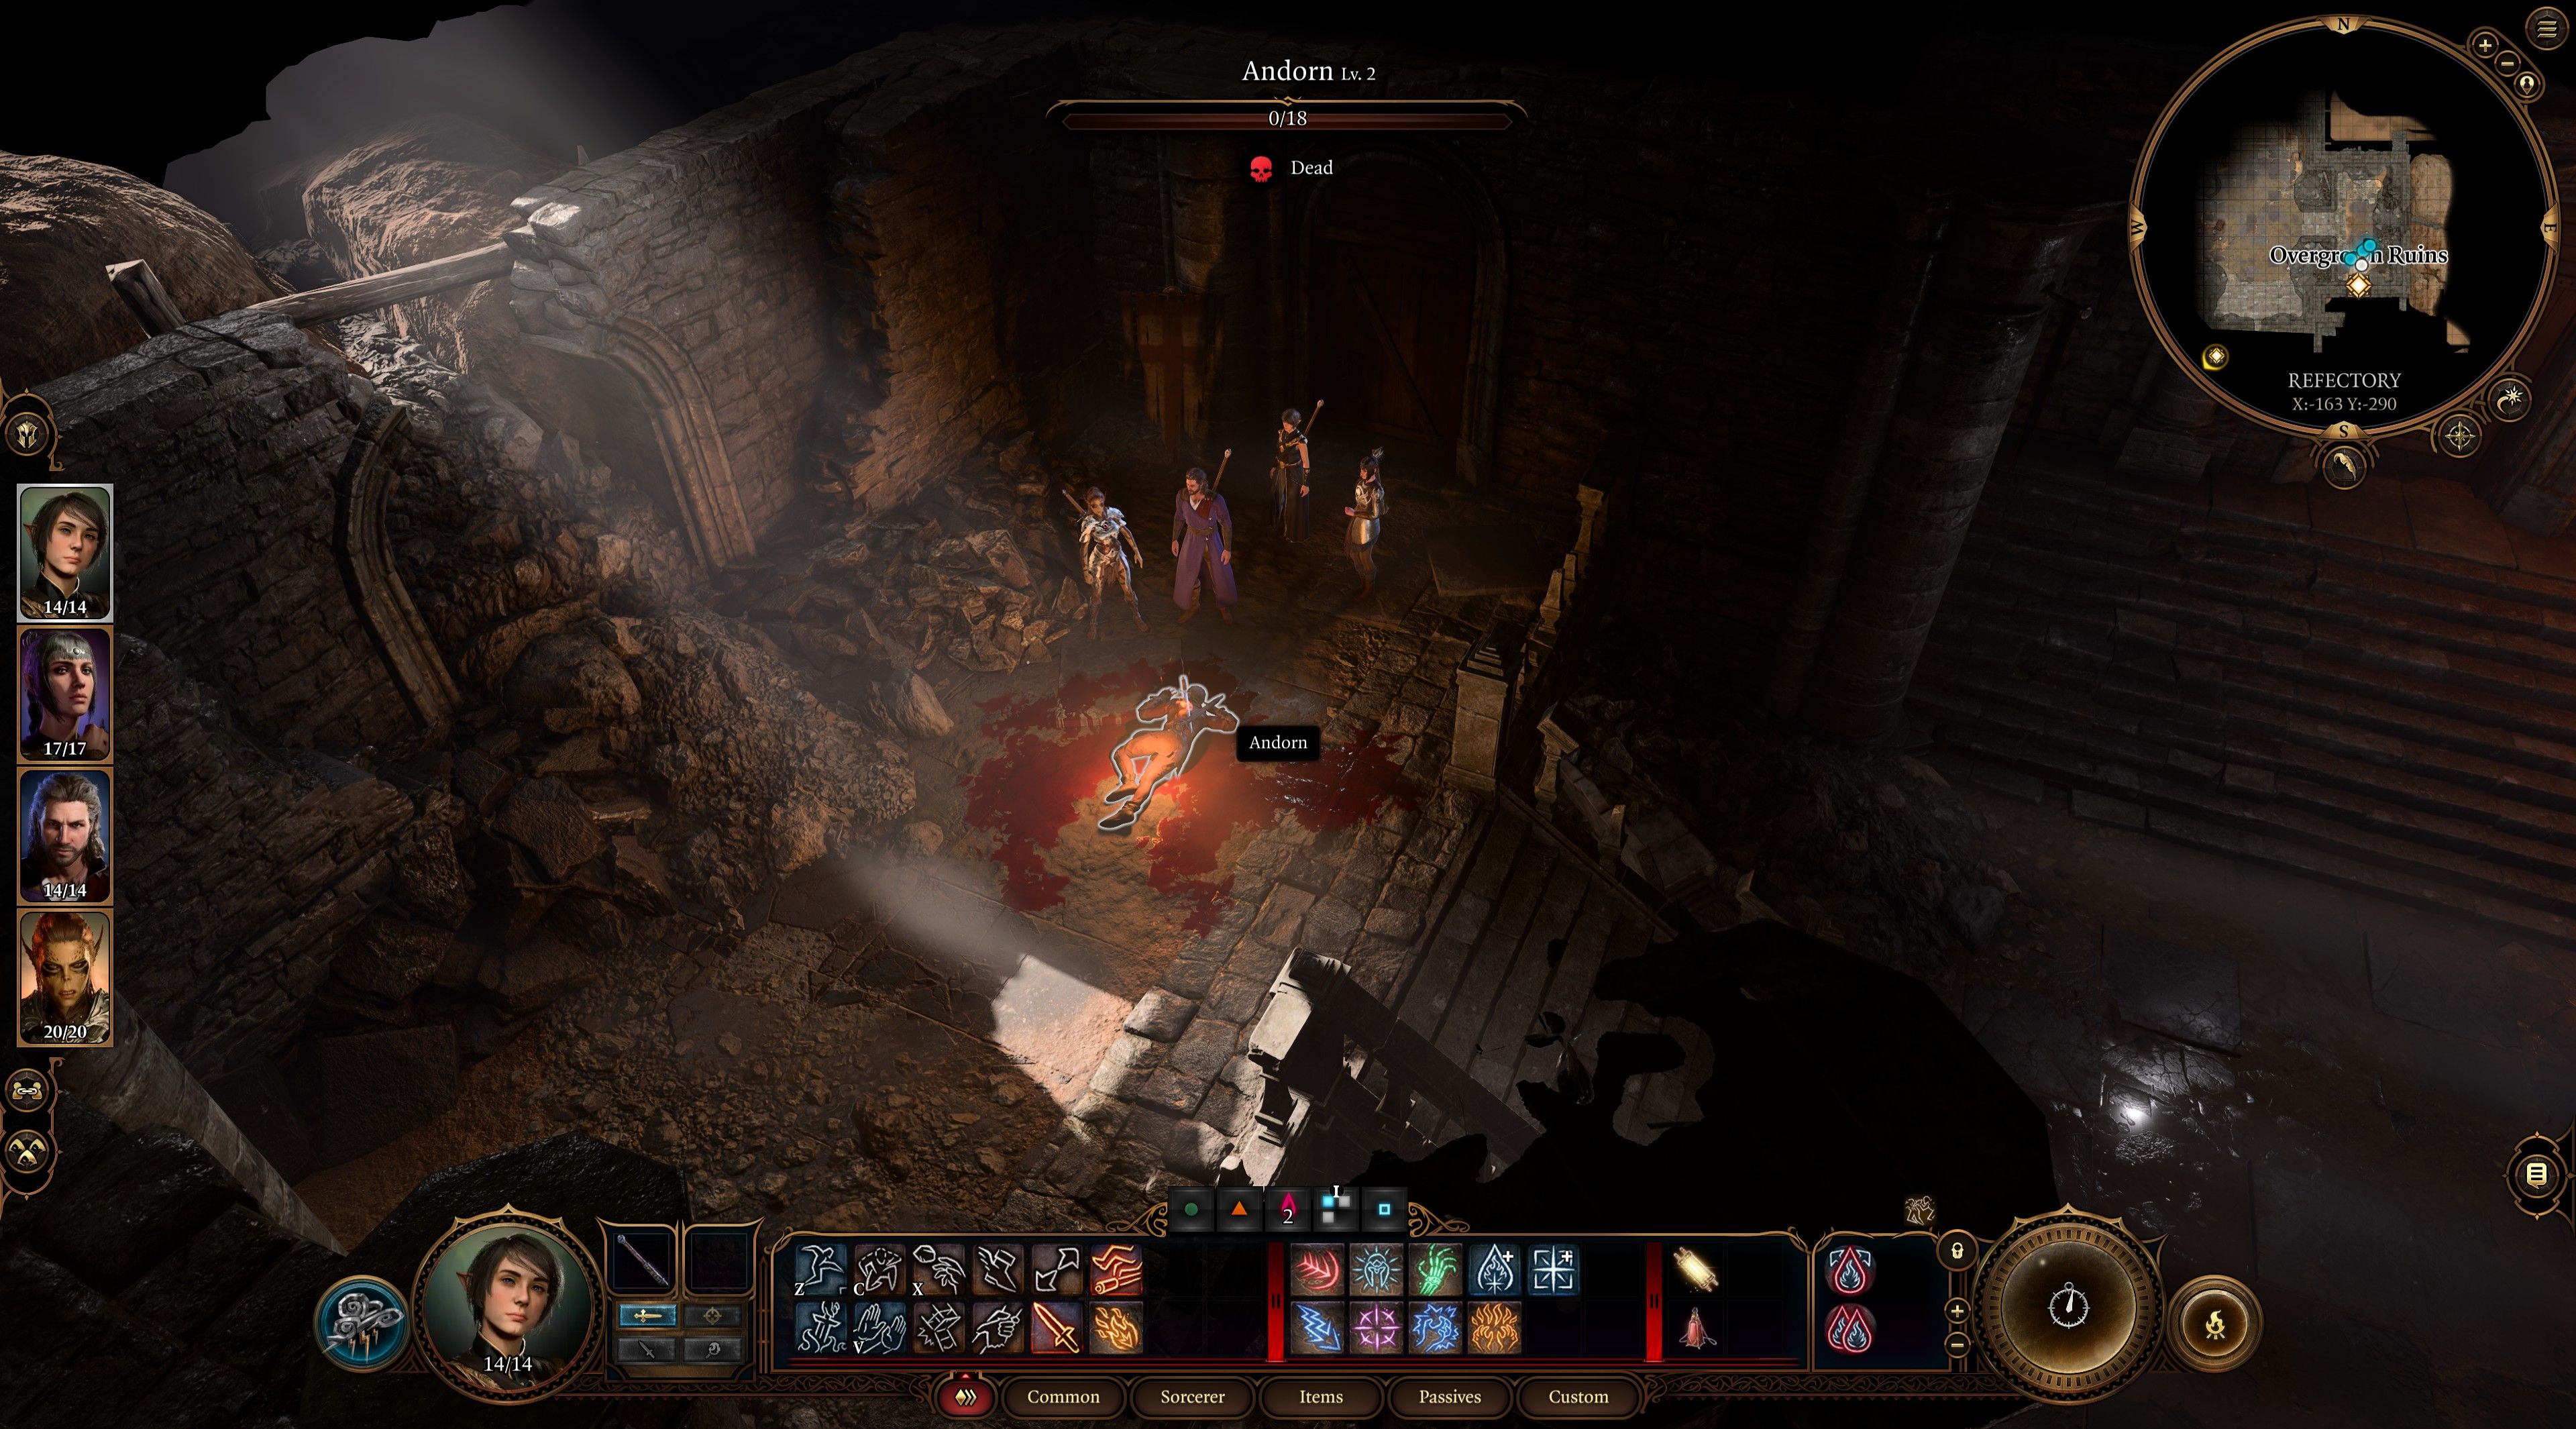 Baldur's Gate 3 Player Party Killing Andorn The Bandit In Refectory Ruins